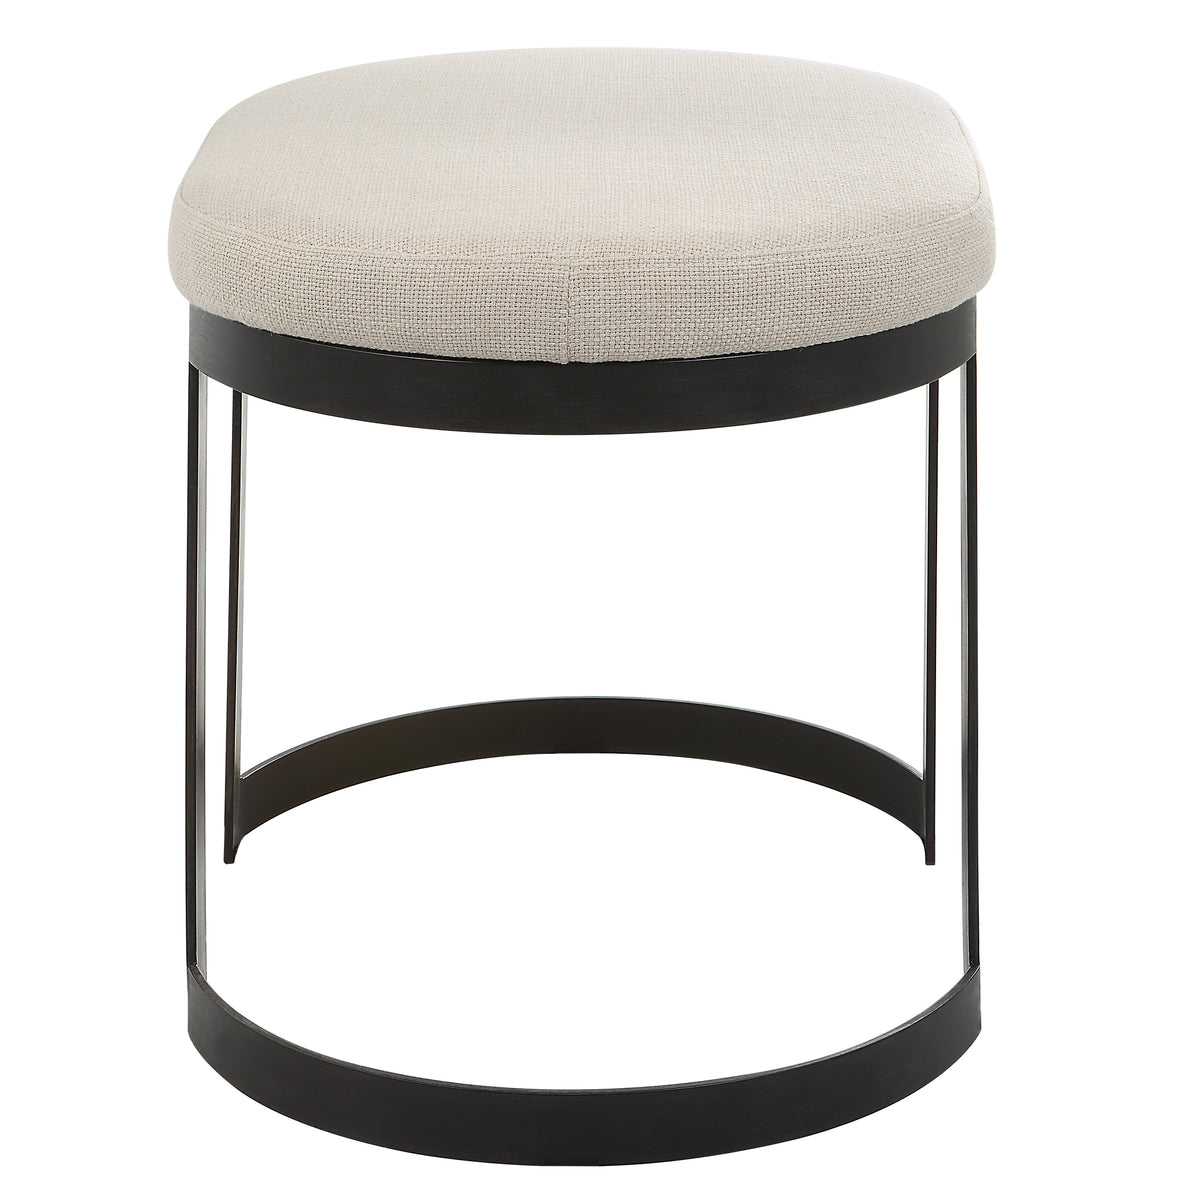 Uttermost Infinity Black Accent Stool